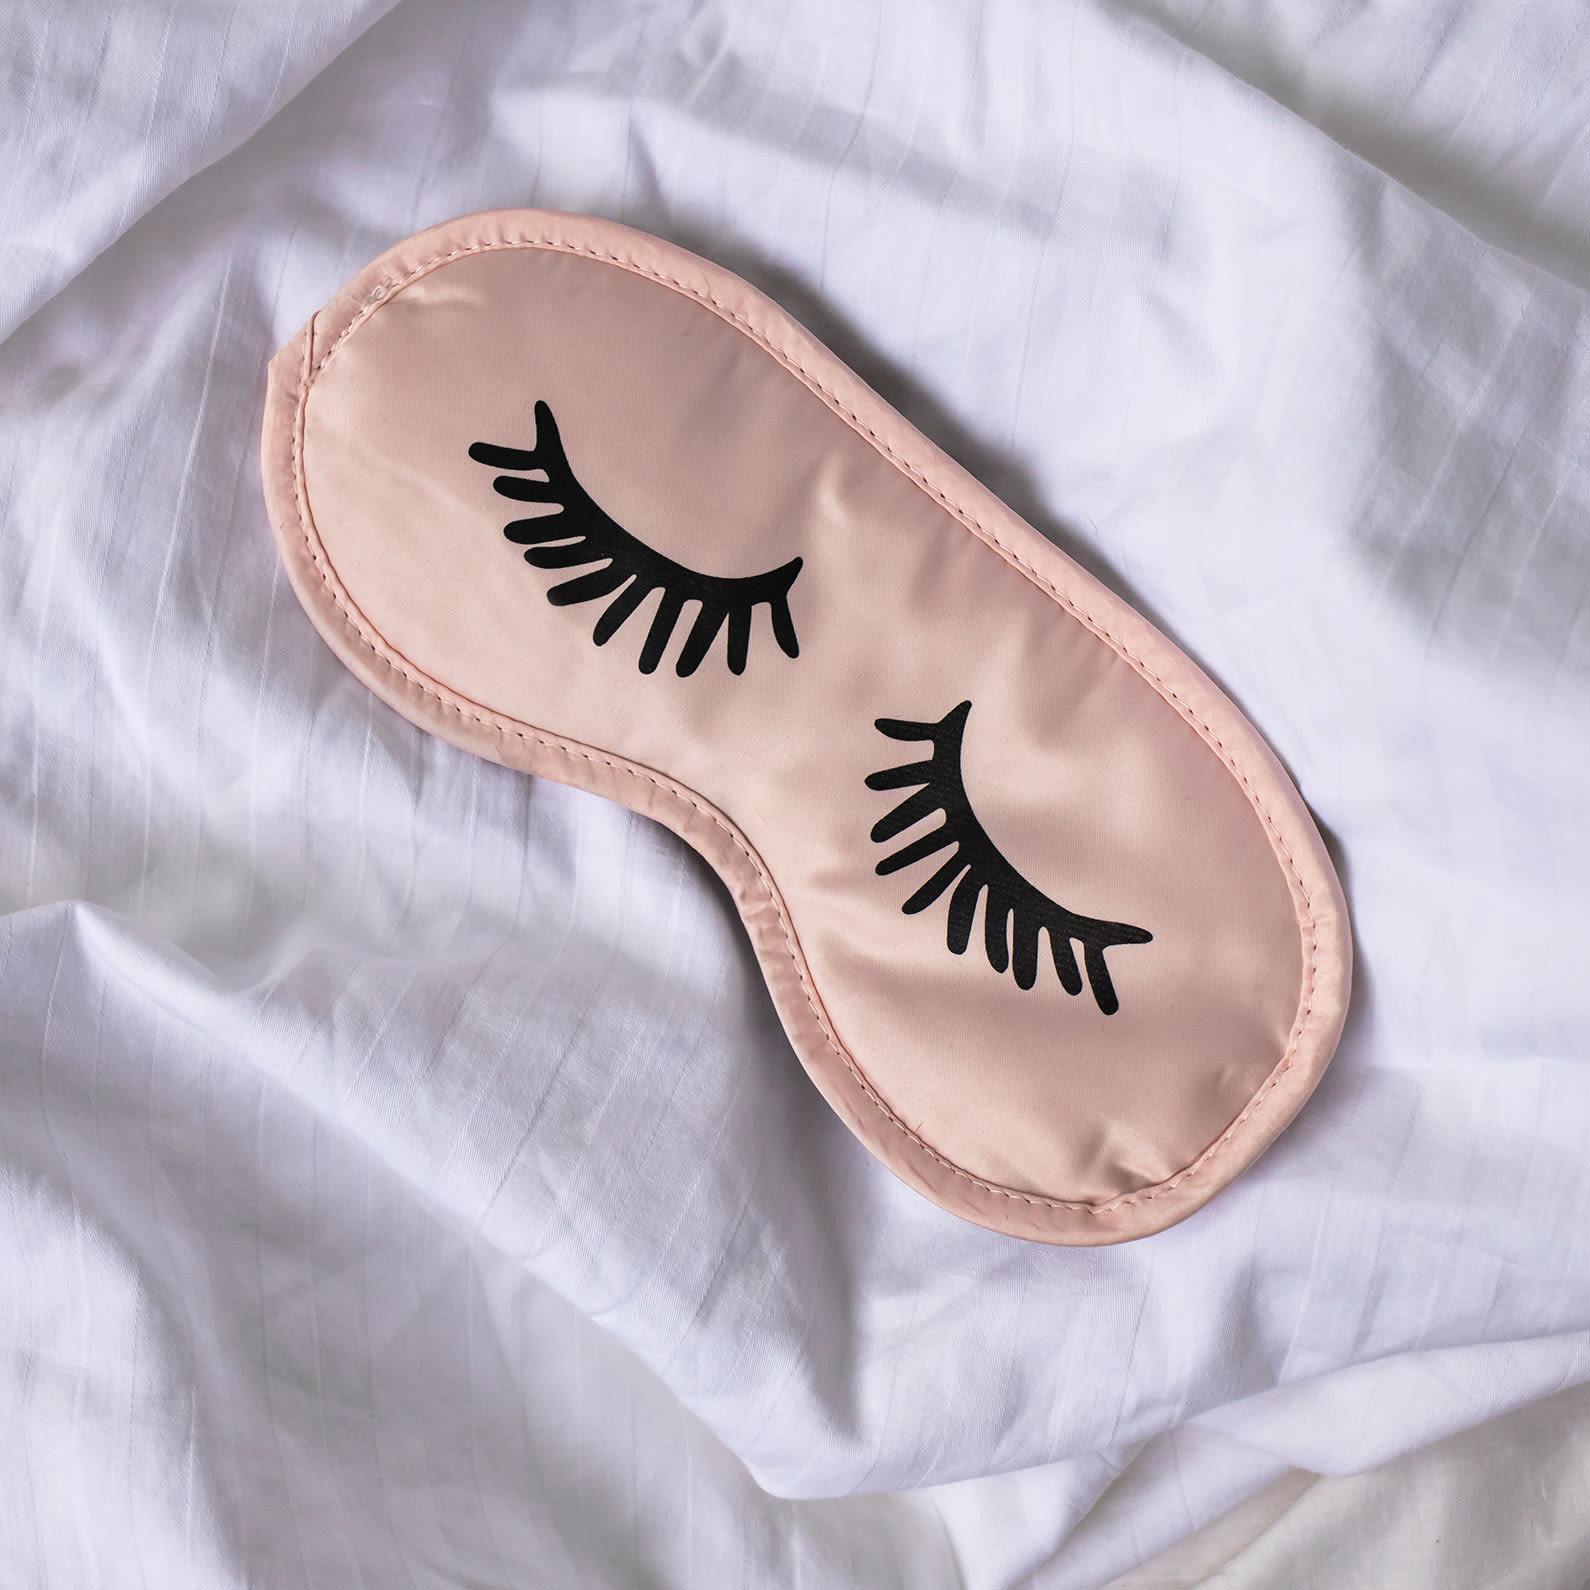 Pink sleep mask with embroidered eyes on a bed